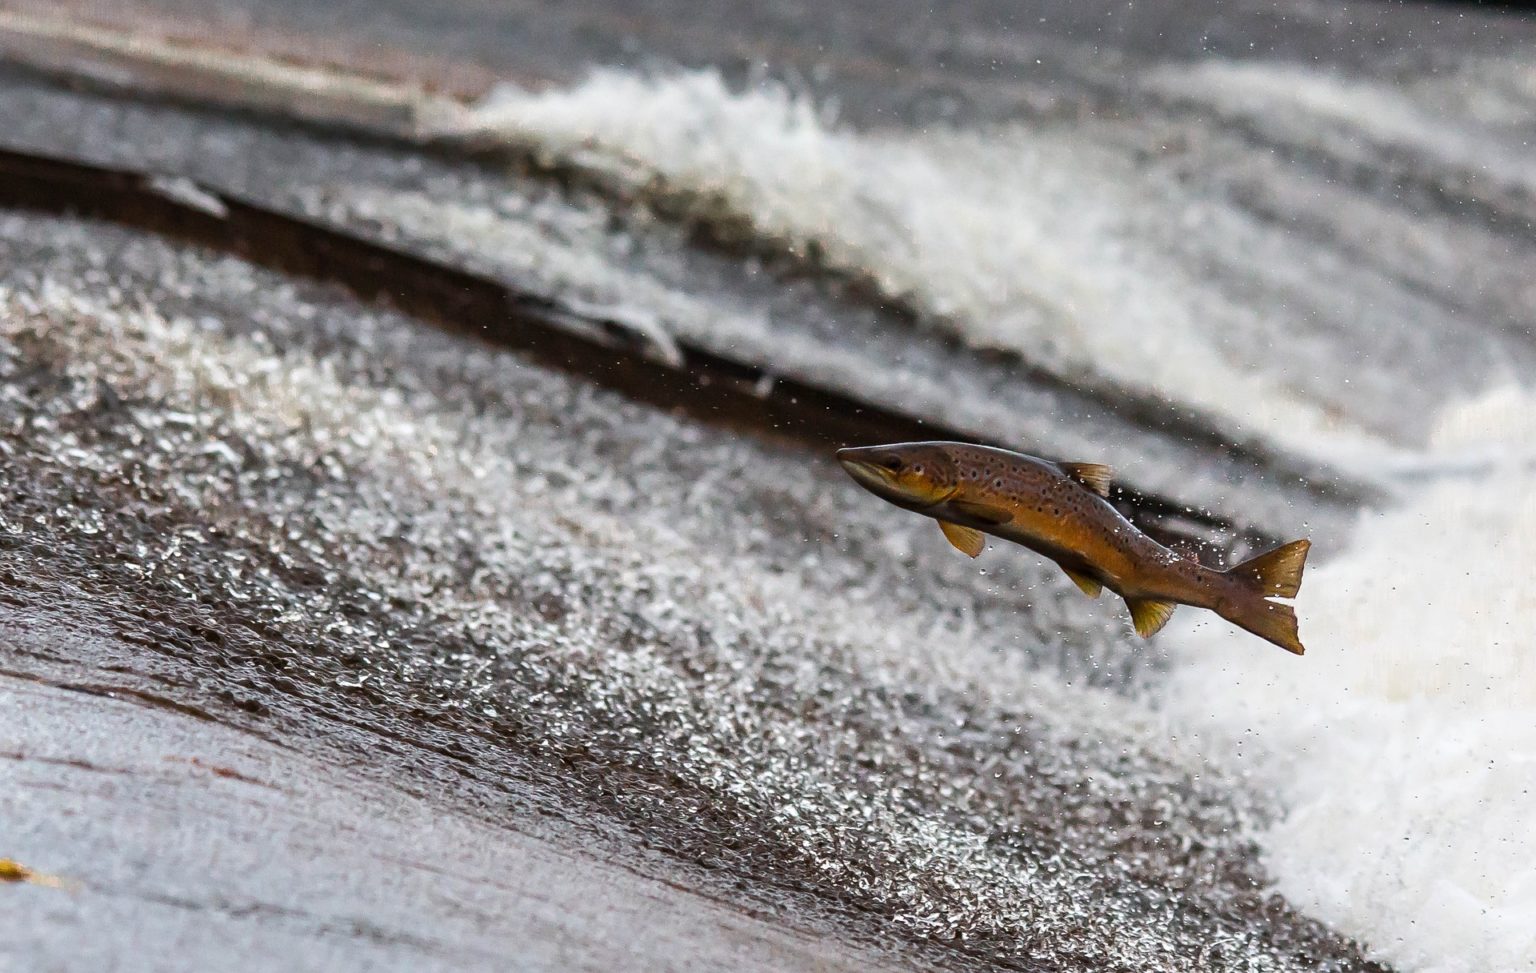 Scientists and river managers are working to increase salmon numbers (Pixabay)